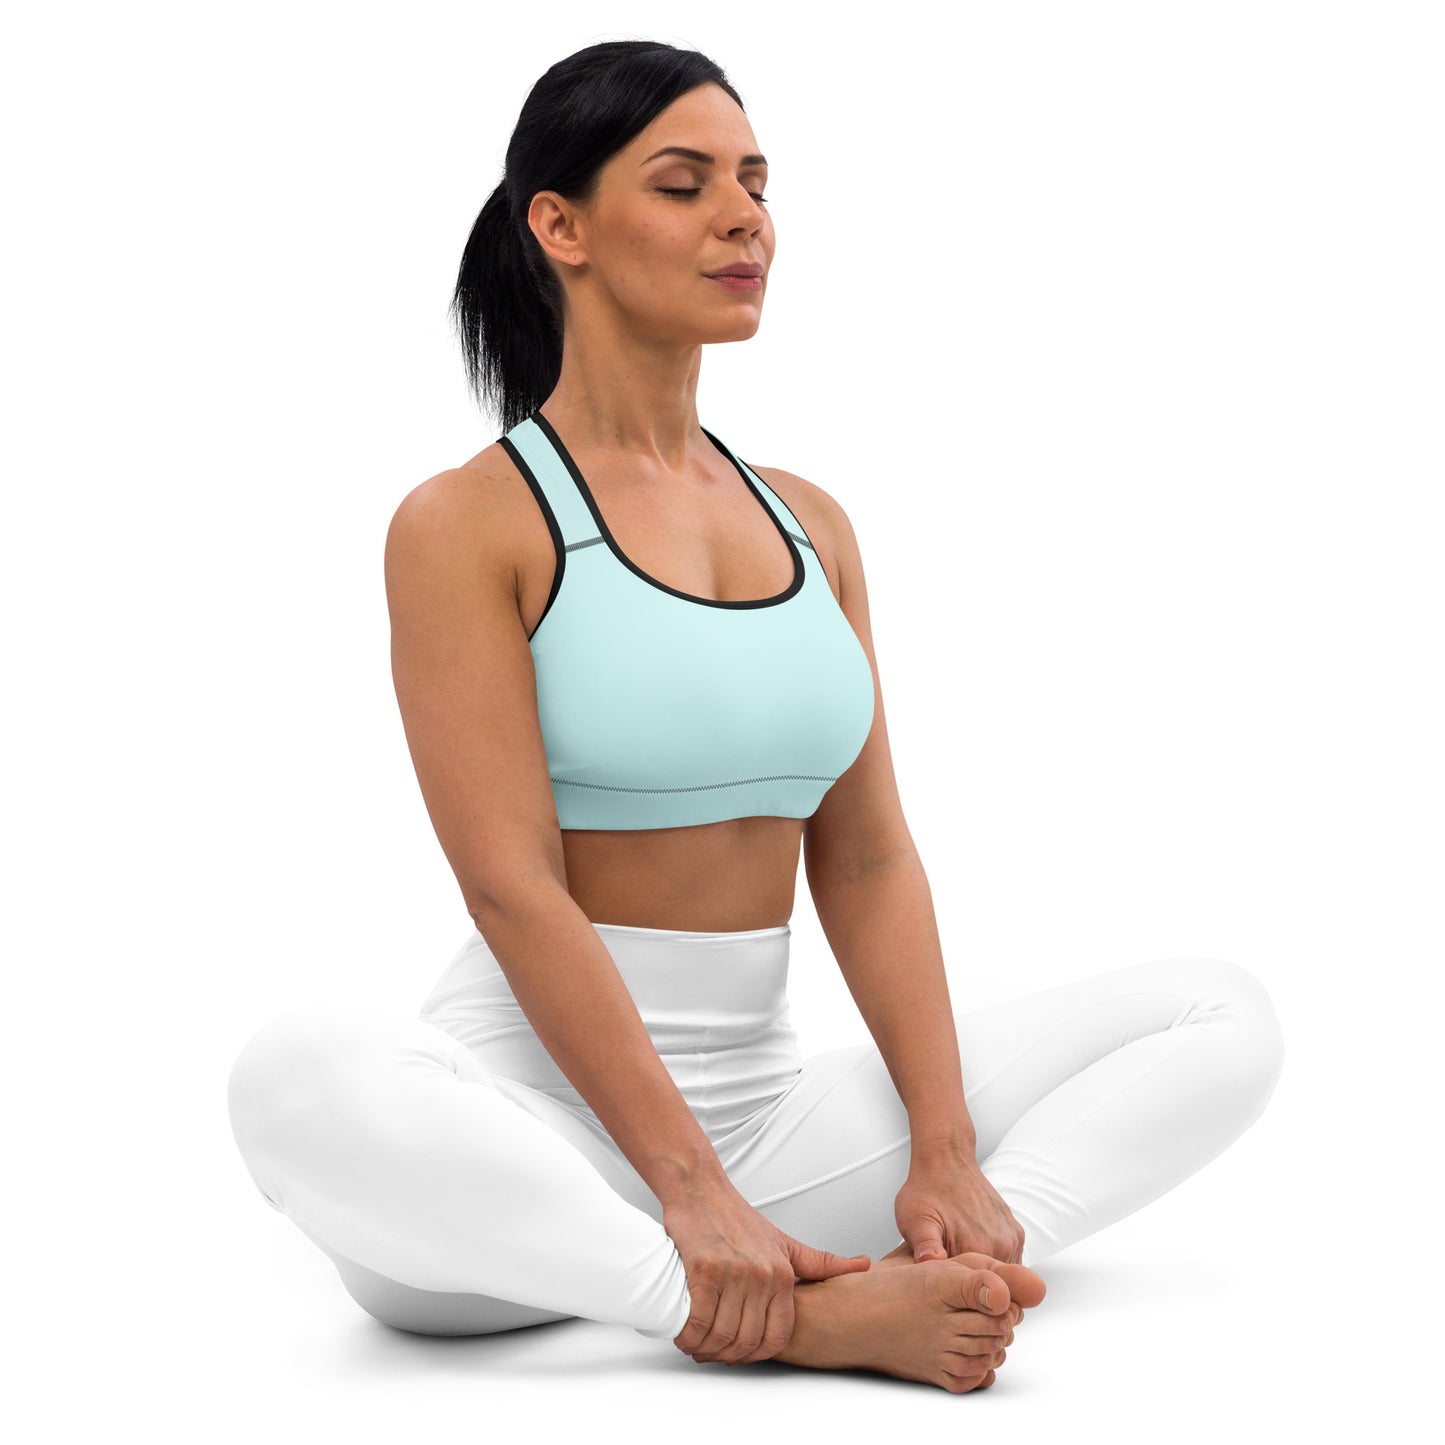 A woman is sitting in a yoga pose, wearing the Sweetest Paw Sports Bra Teal.